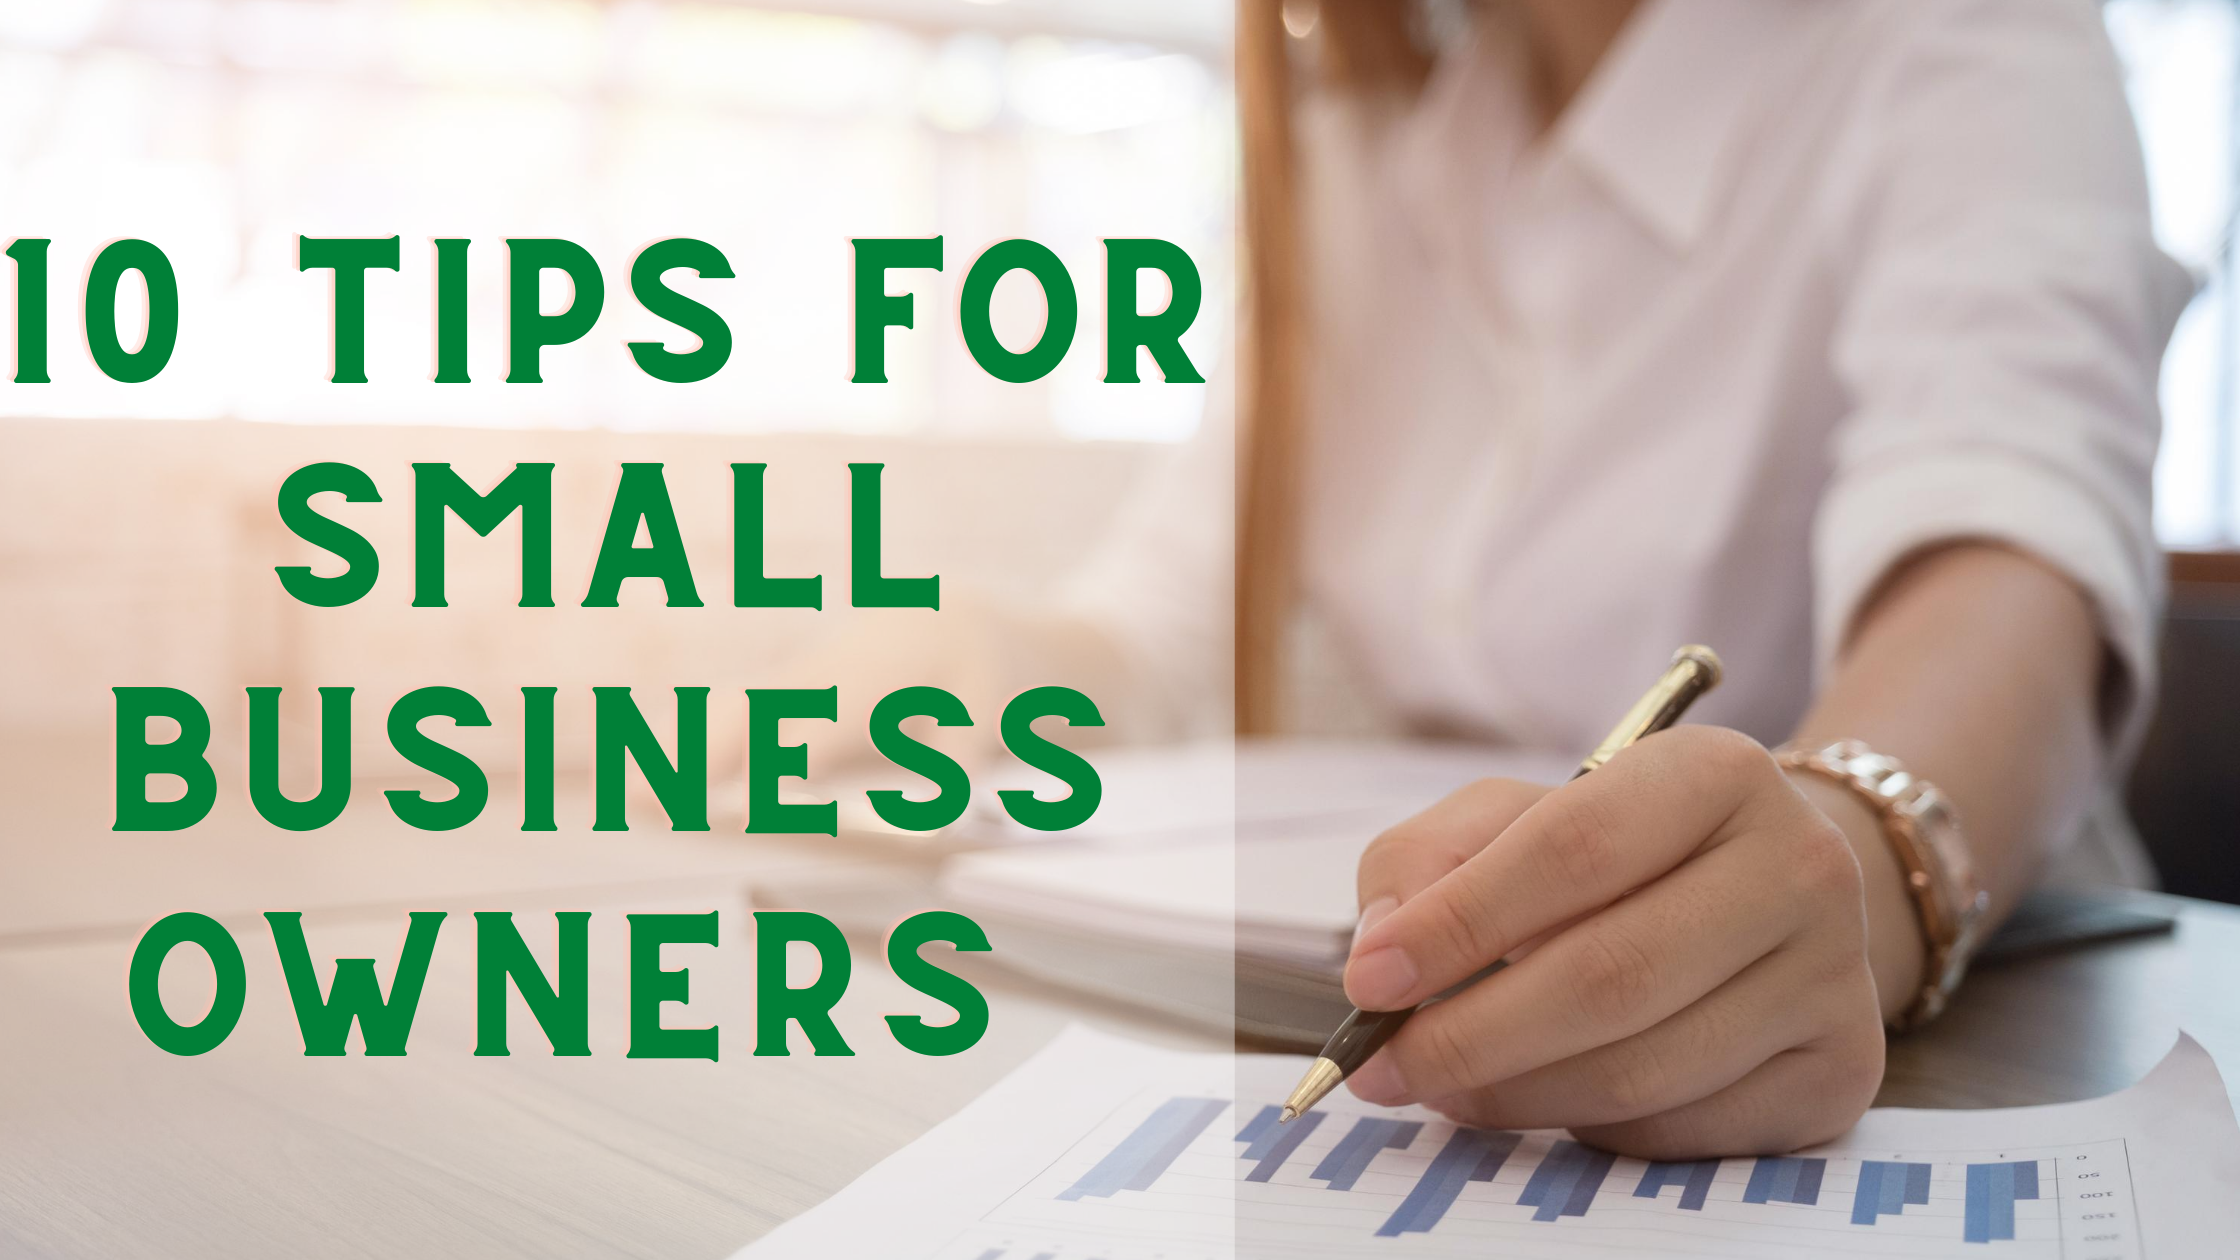 10 Tips For Small Business Owners